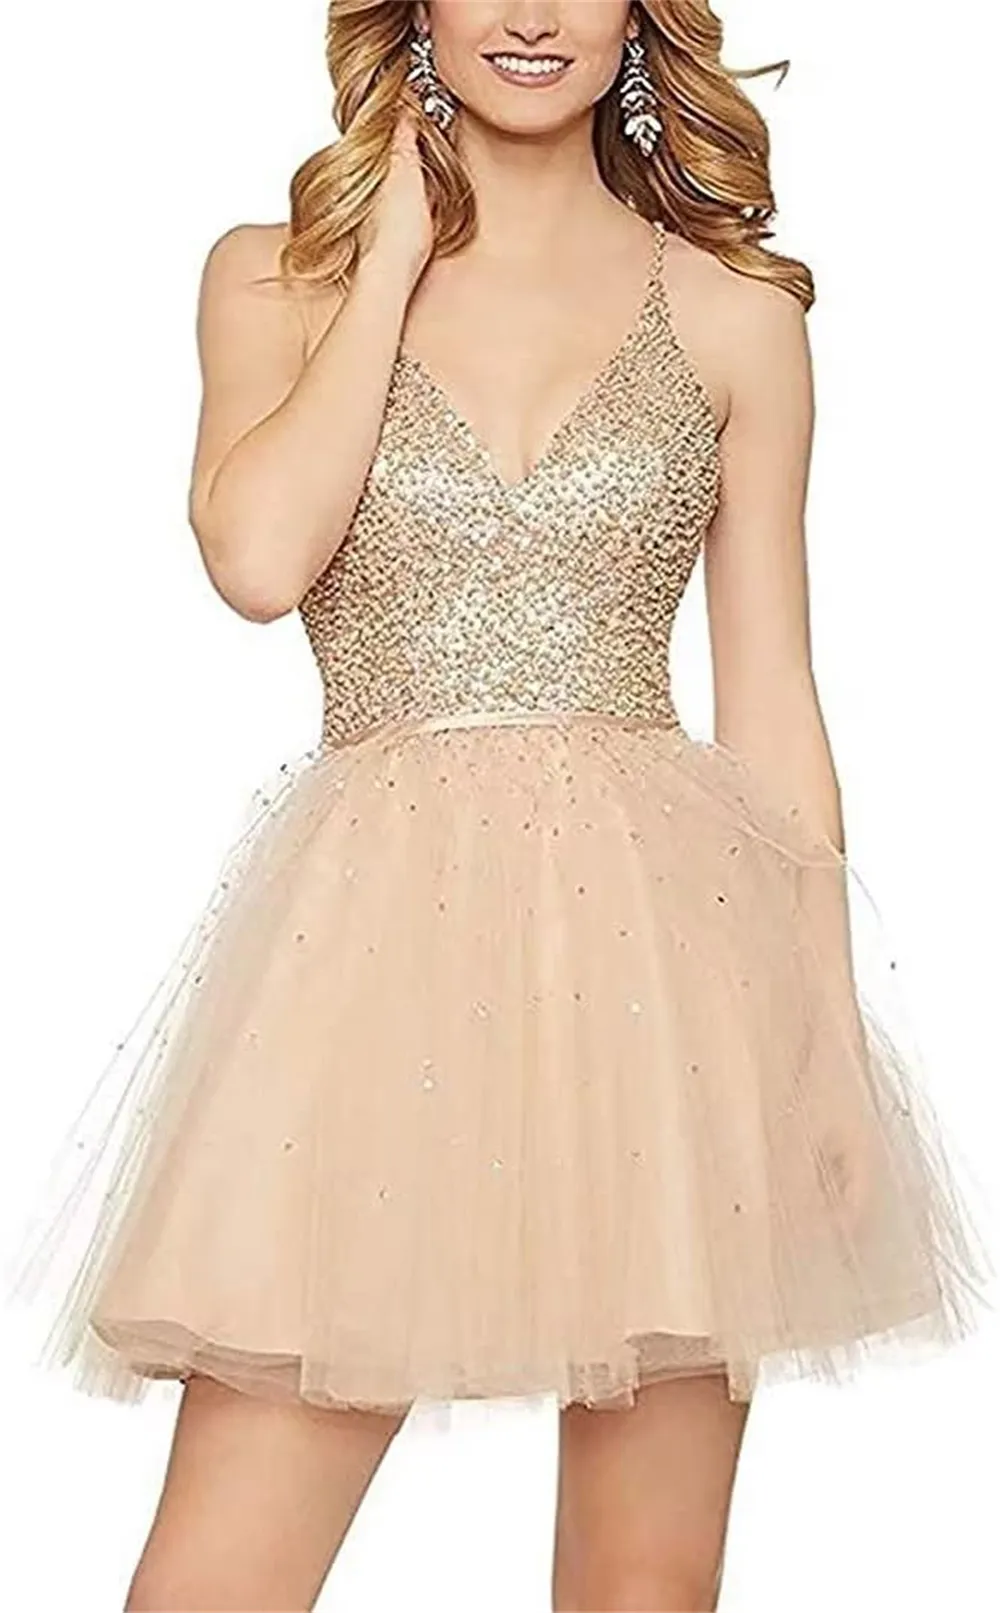 Short Homecoming Dresses Spaghetti Beading Sequins Deep V-Neck Ball Gown Party Gowns Princess Plus Size Mini Birthday Prom Graudation Cocktail Party Gowns 61